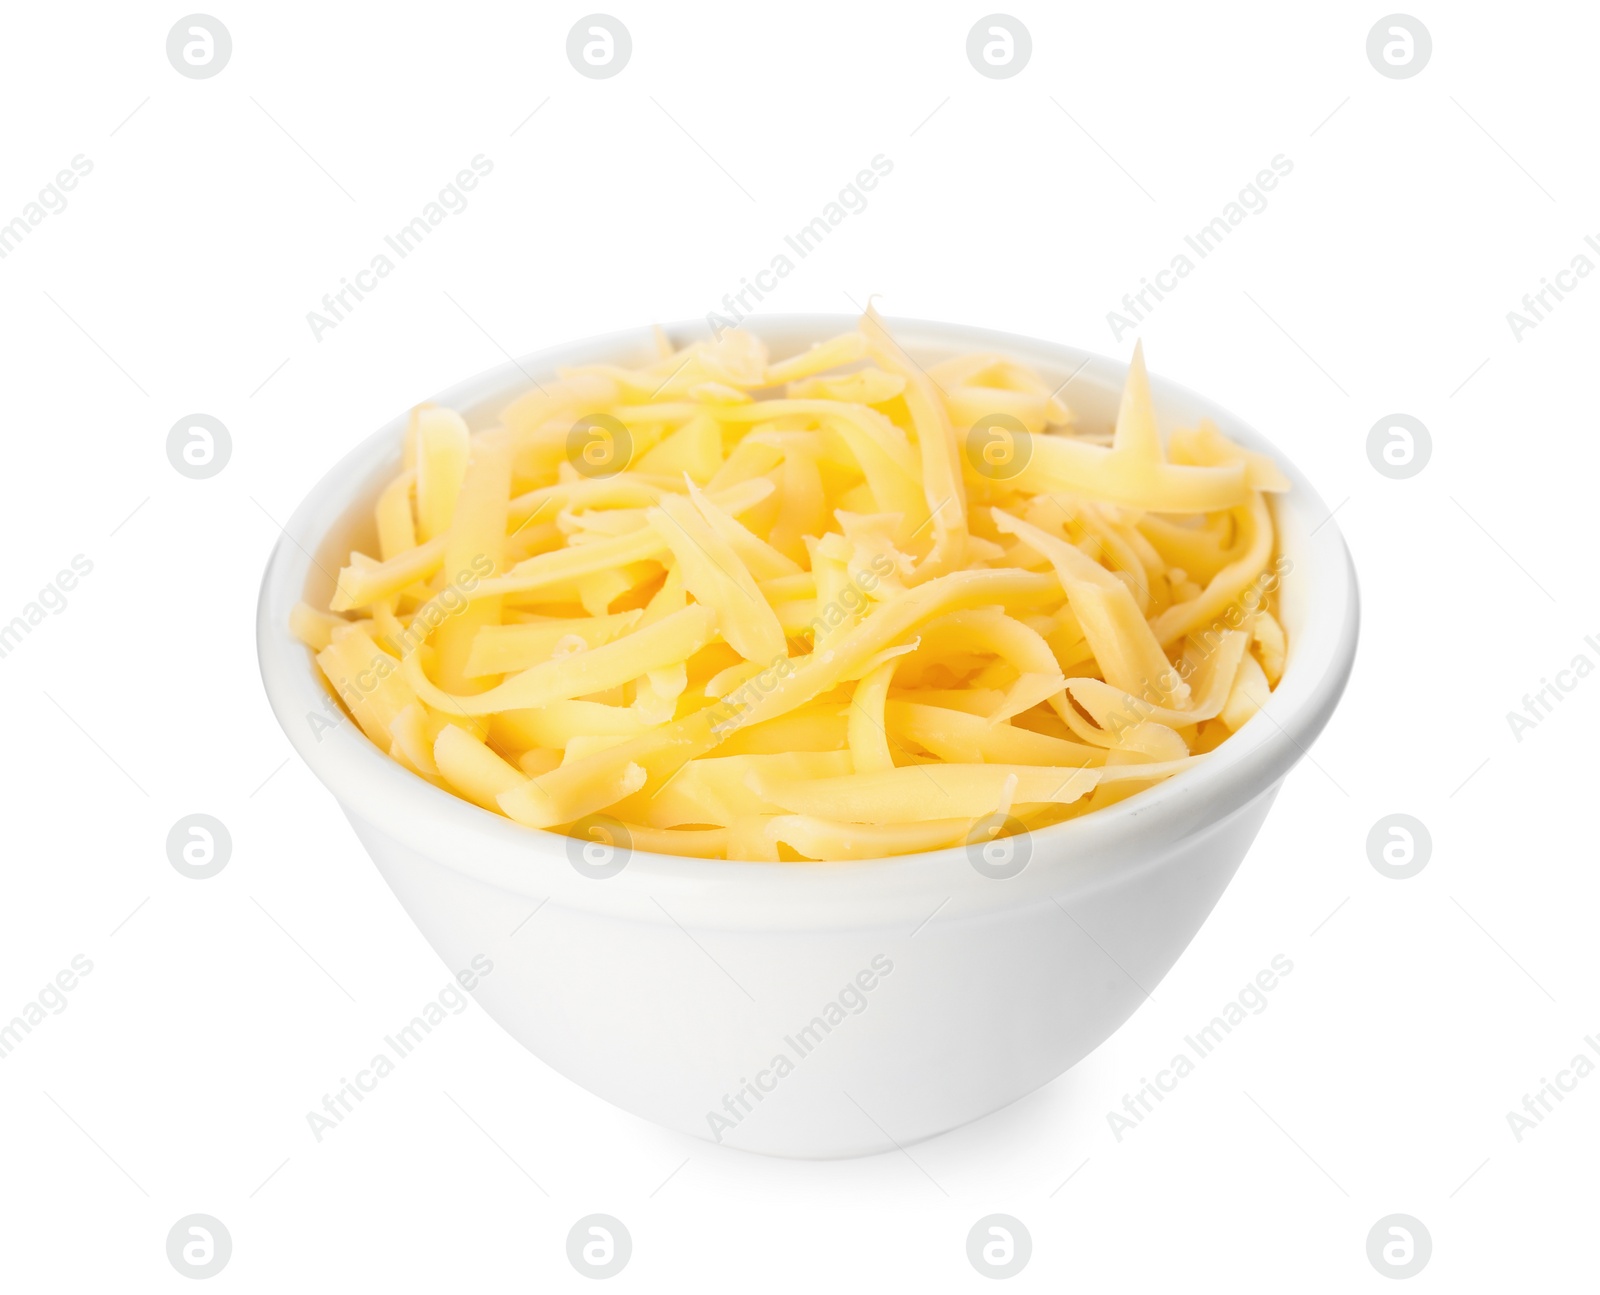 Photo of Bowl with grated cheese isolated on white